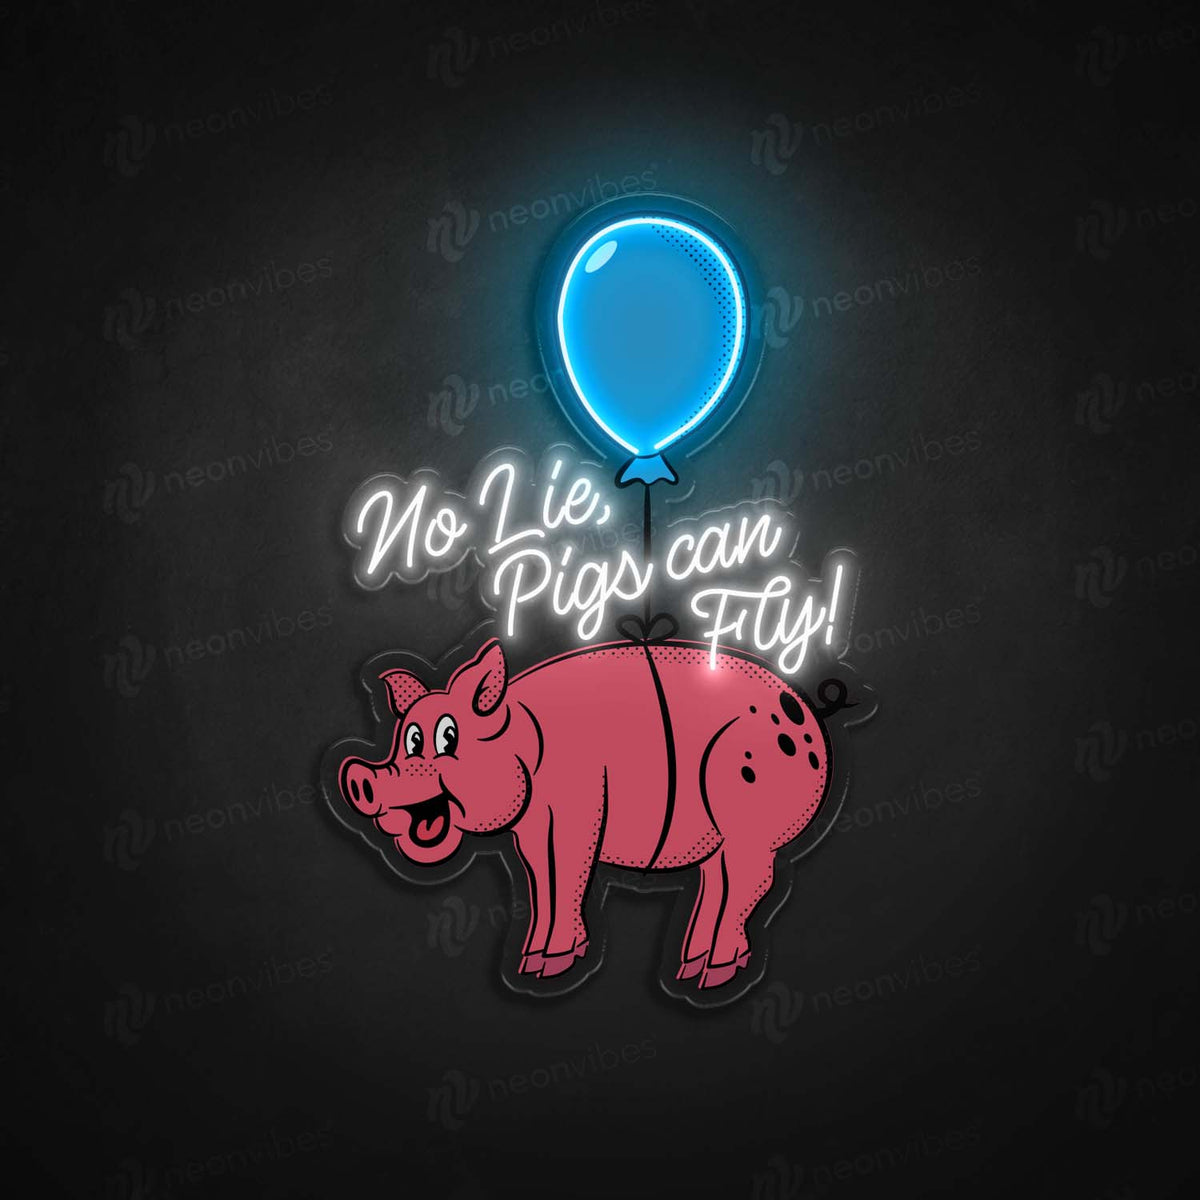 No Lie Pigs Can Fly neon sign